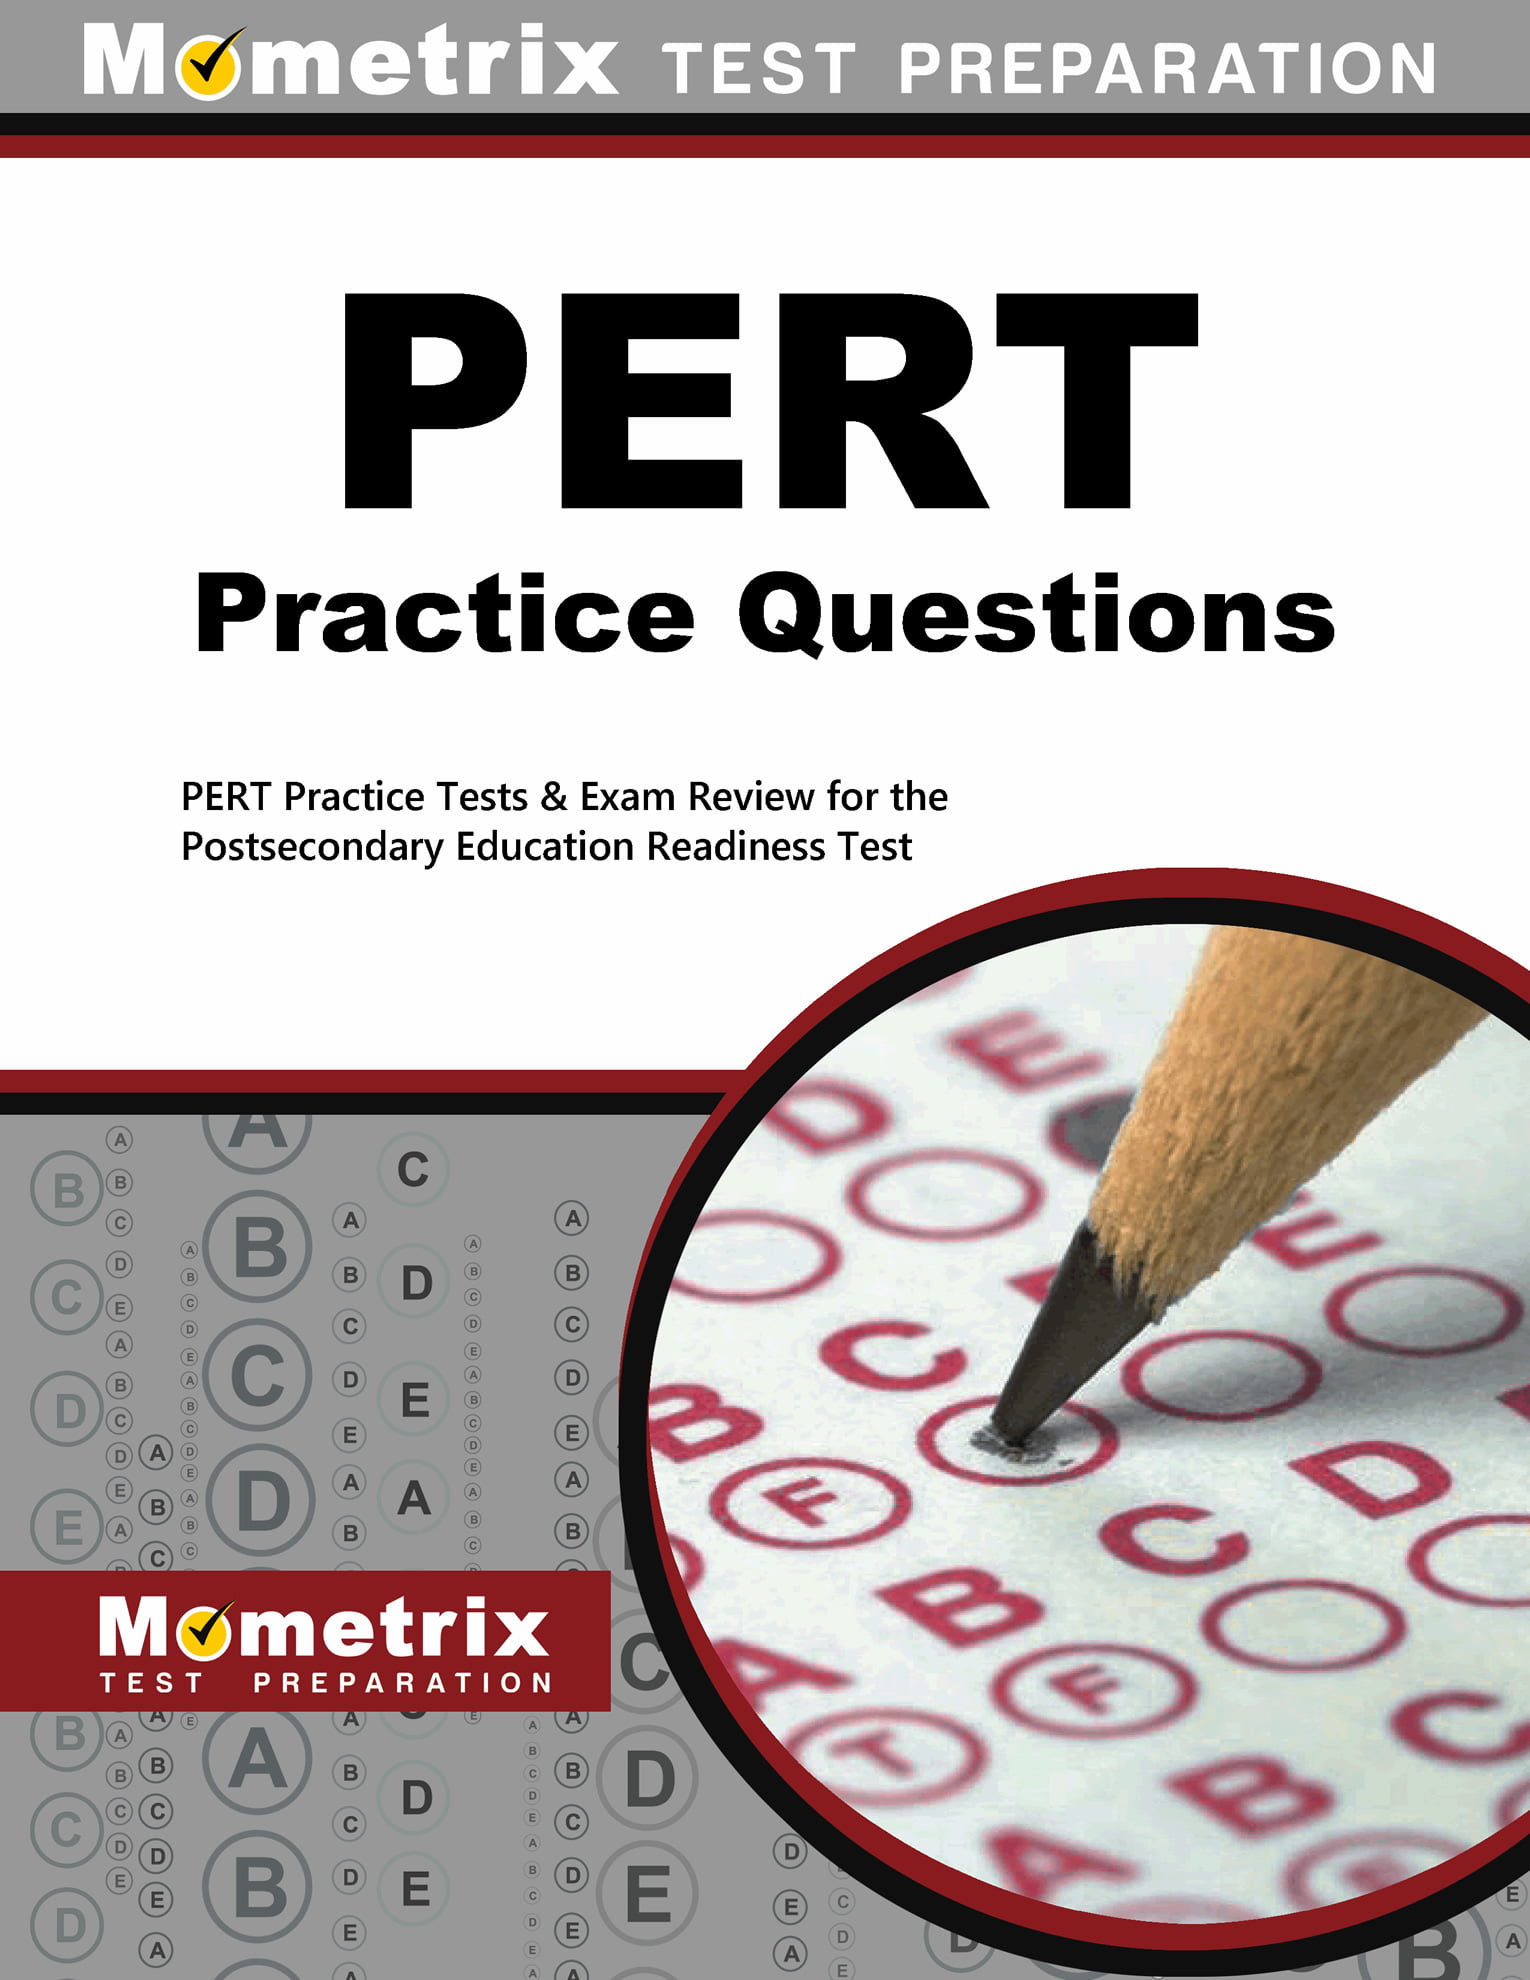 pert-practice-questions-pert-practice-tests-exam-review-for-the